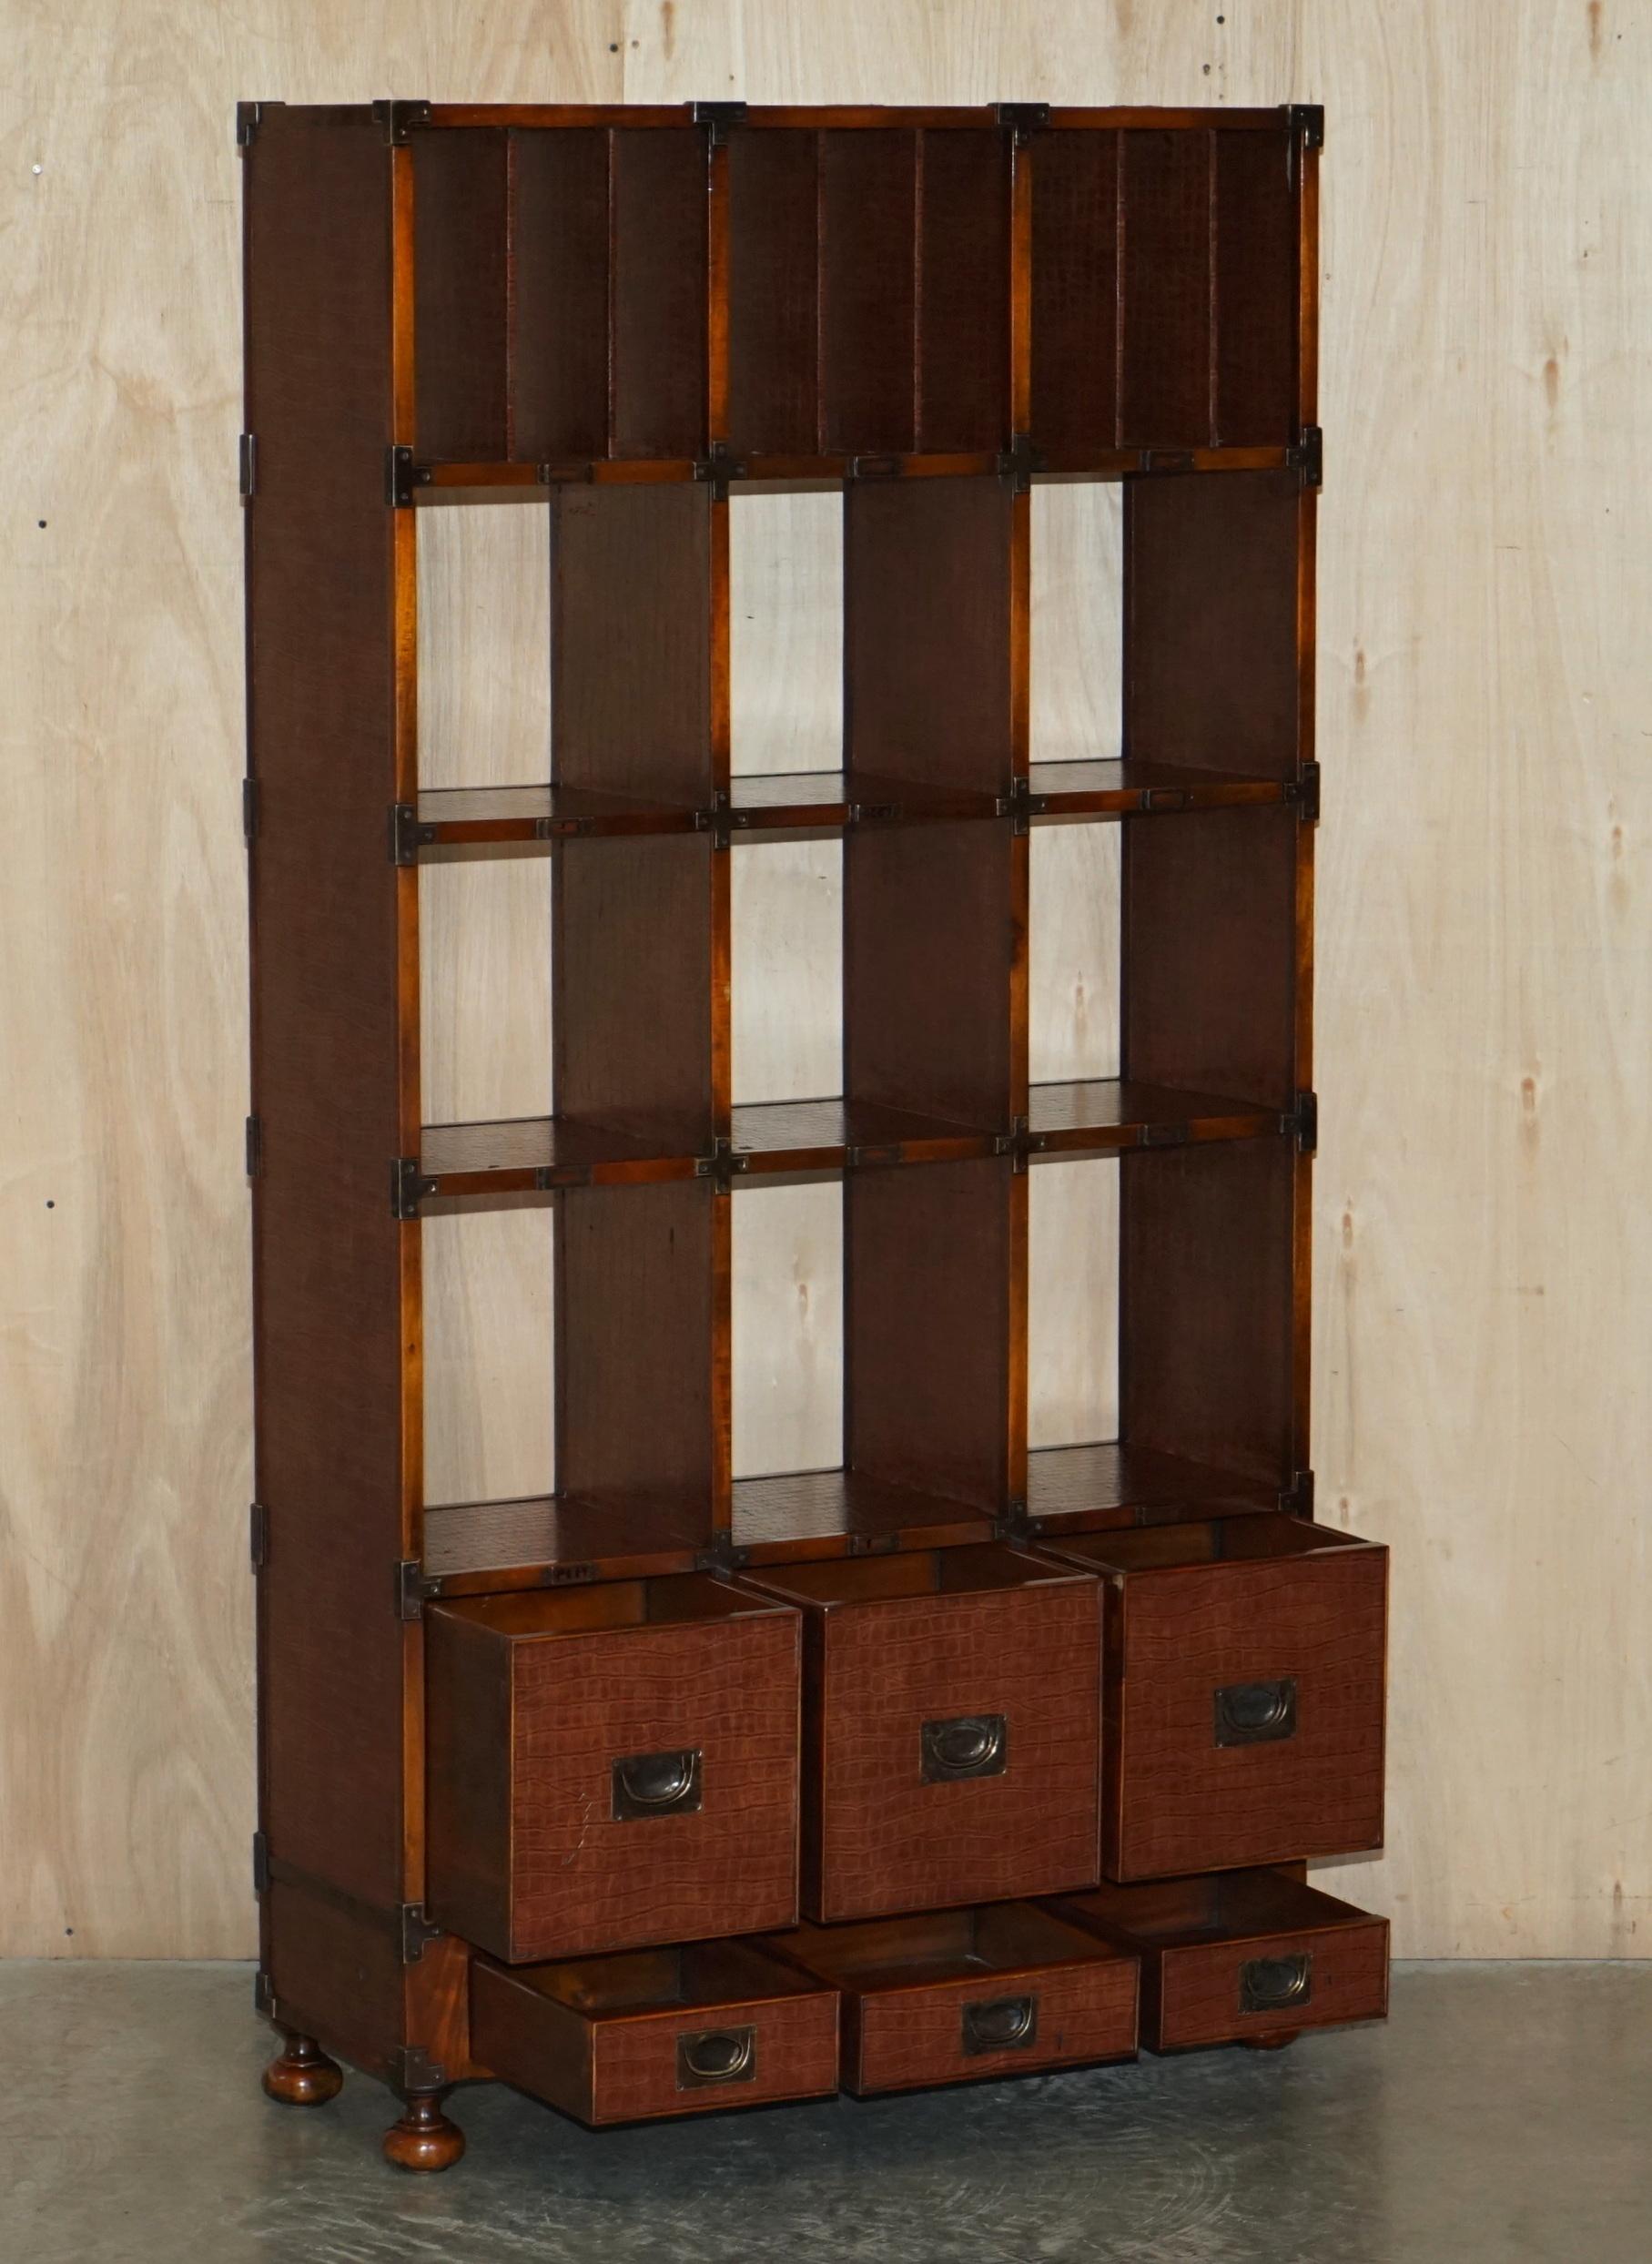 PAIR OF CROCODILE LEATHER Offene LiBRARY-BOOKCASES MIT DRAWERS & RECORD SLOTS im Angebot 4